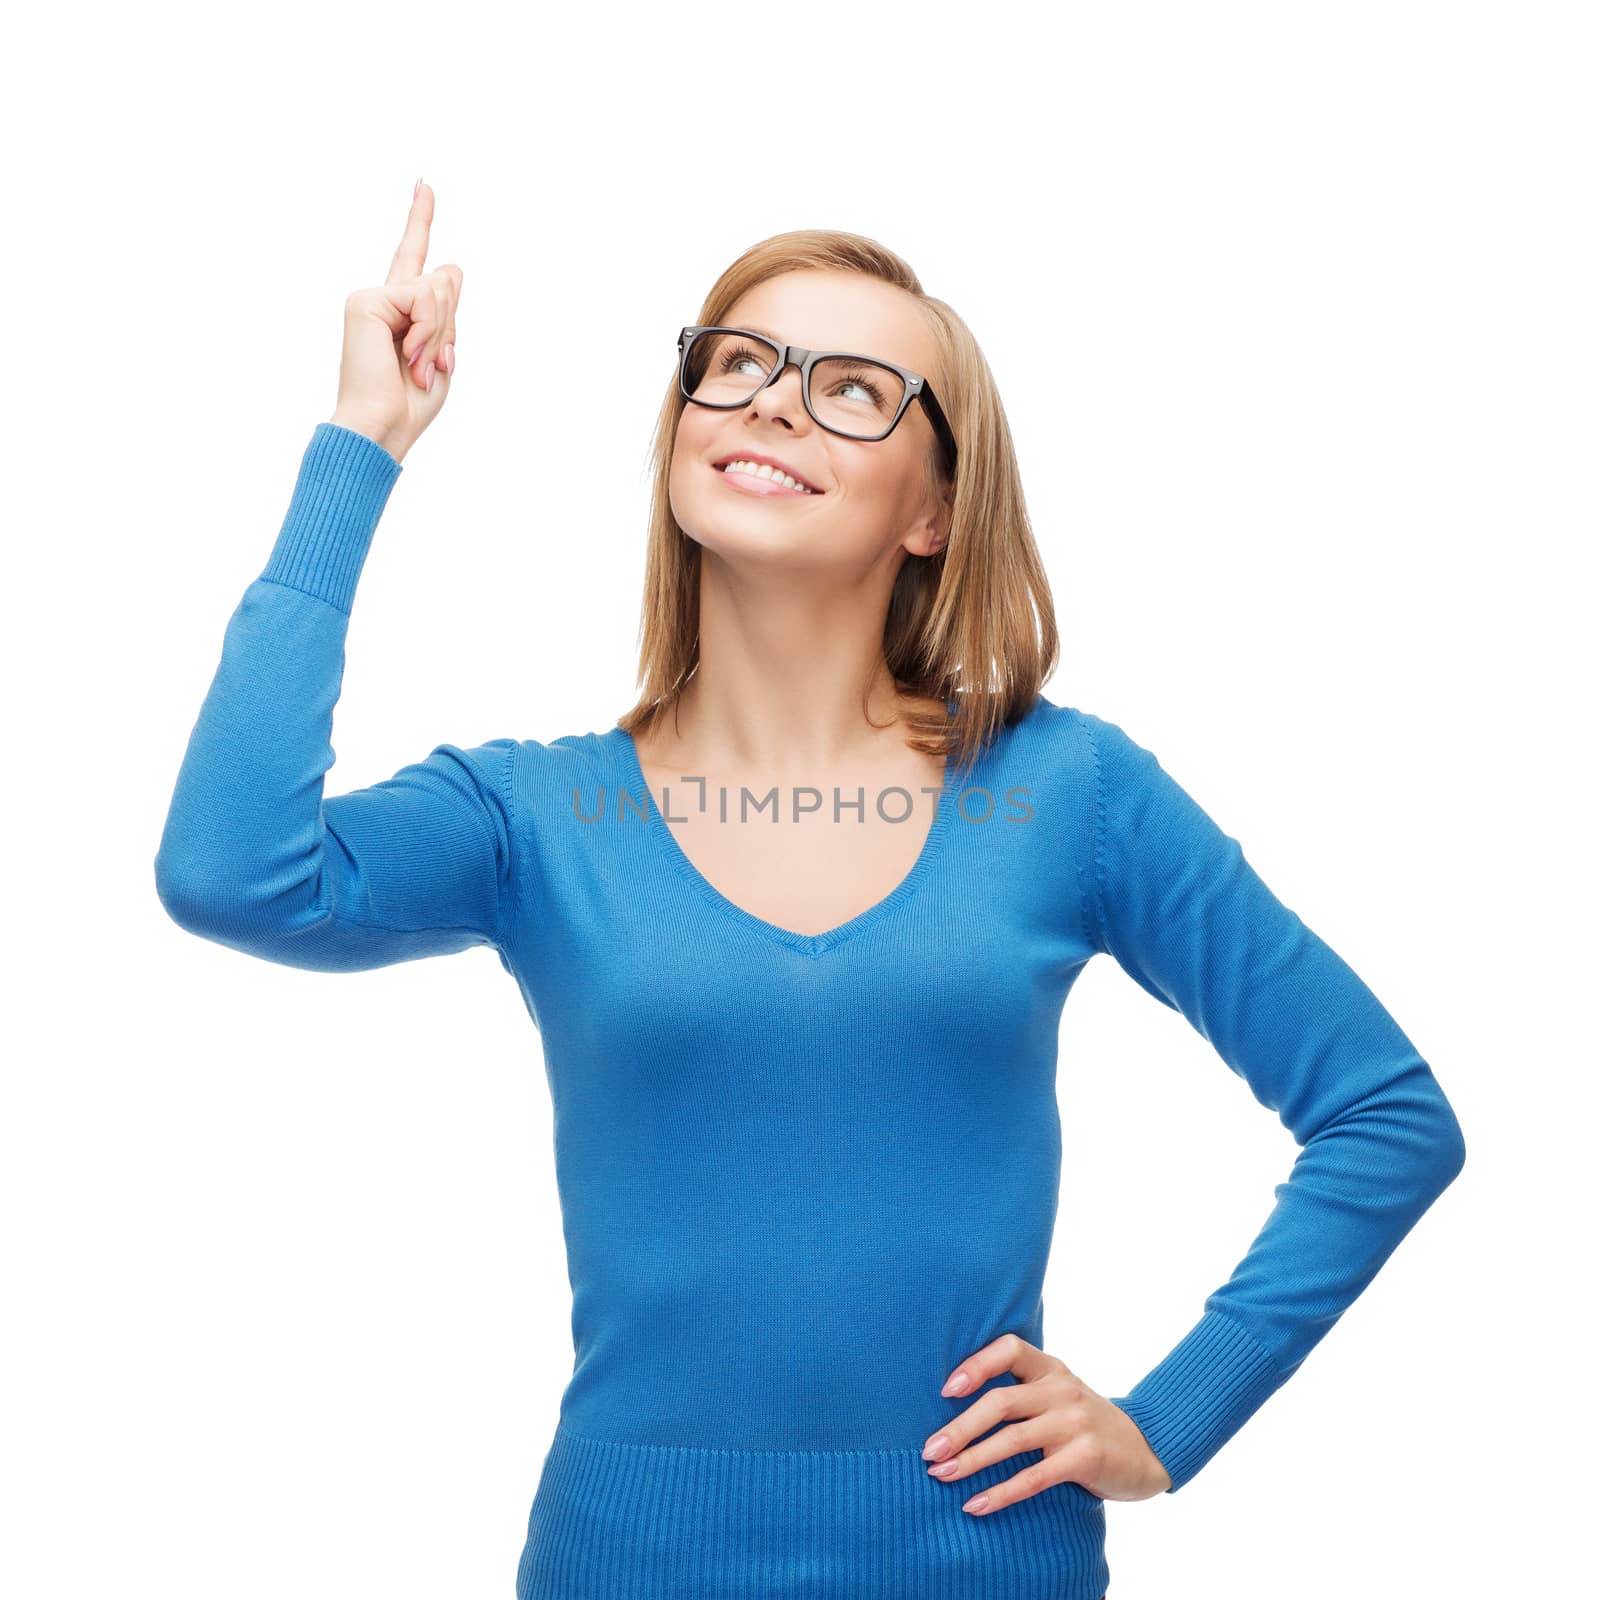 smiling woman pointing her finger up by dolgachov